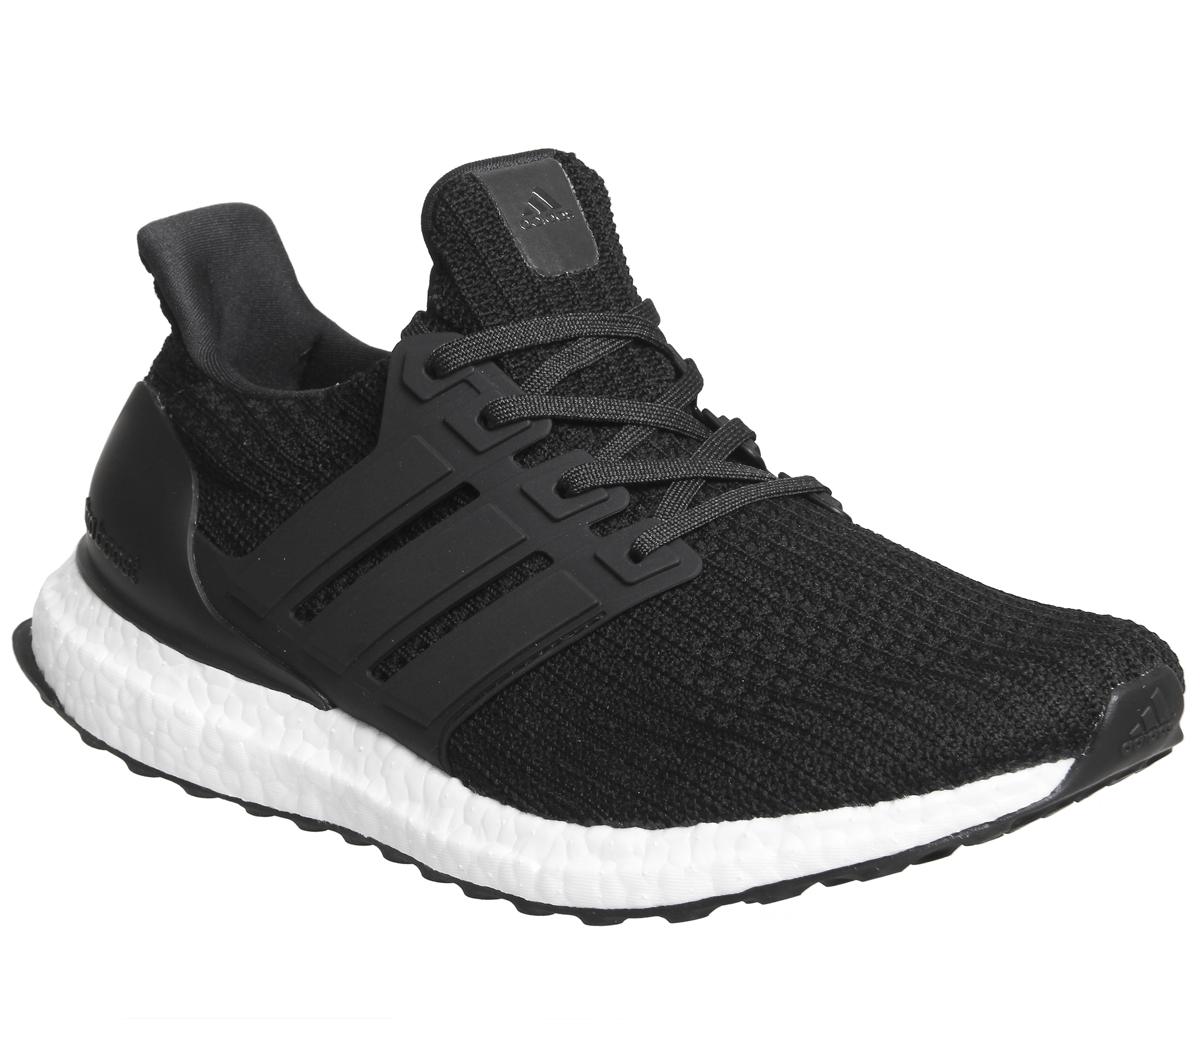 adidas ultra boost trainers - 58% OFF 